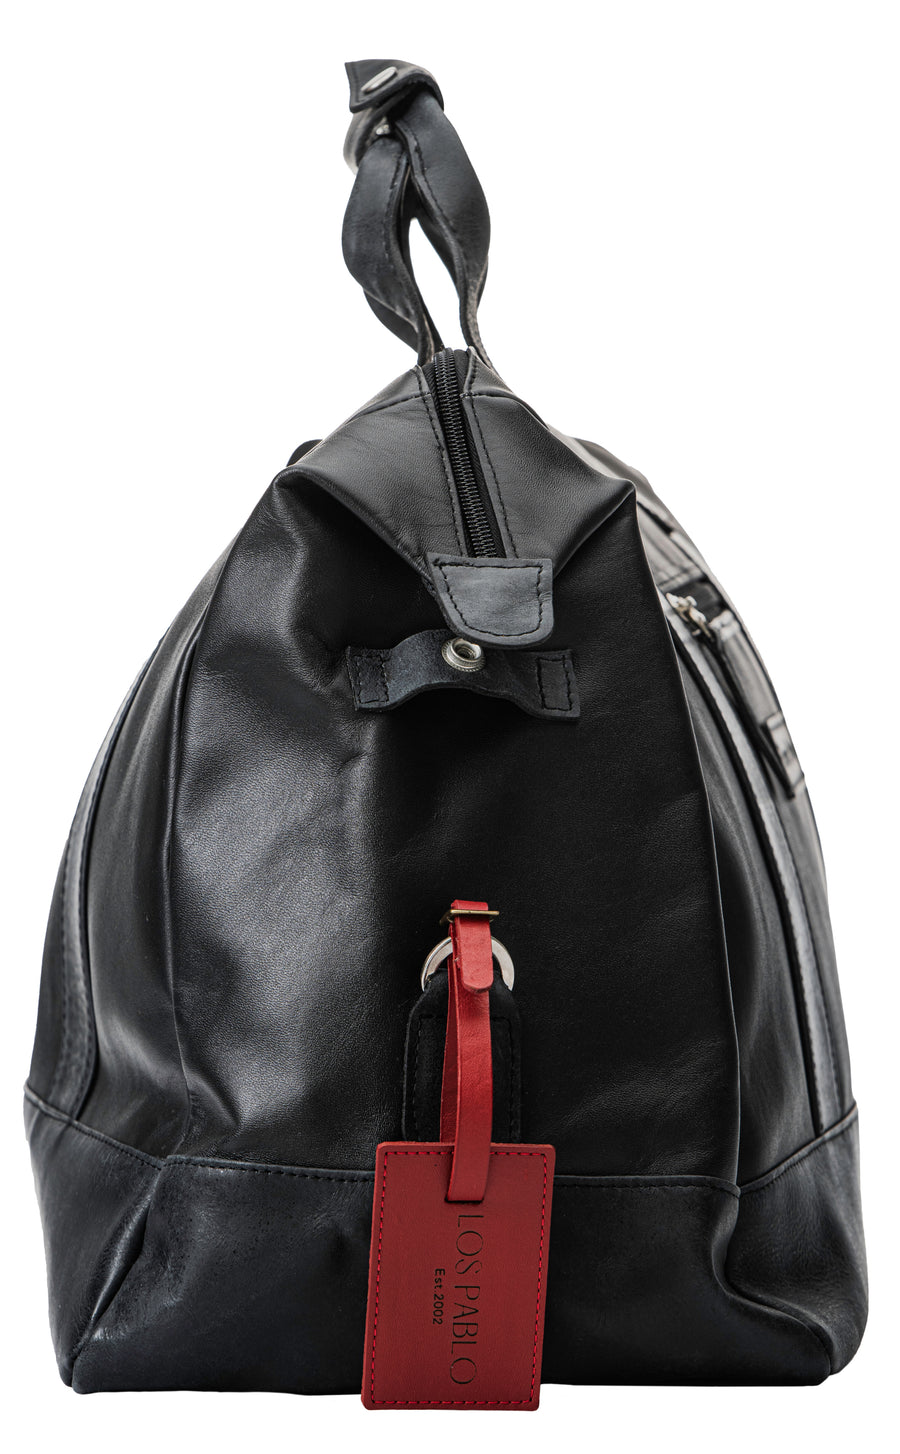 TRAVEL COLLECTION LOS PABLO DUFFLE BAG - BLACK AND CRIMSON RED